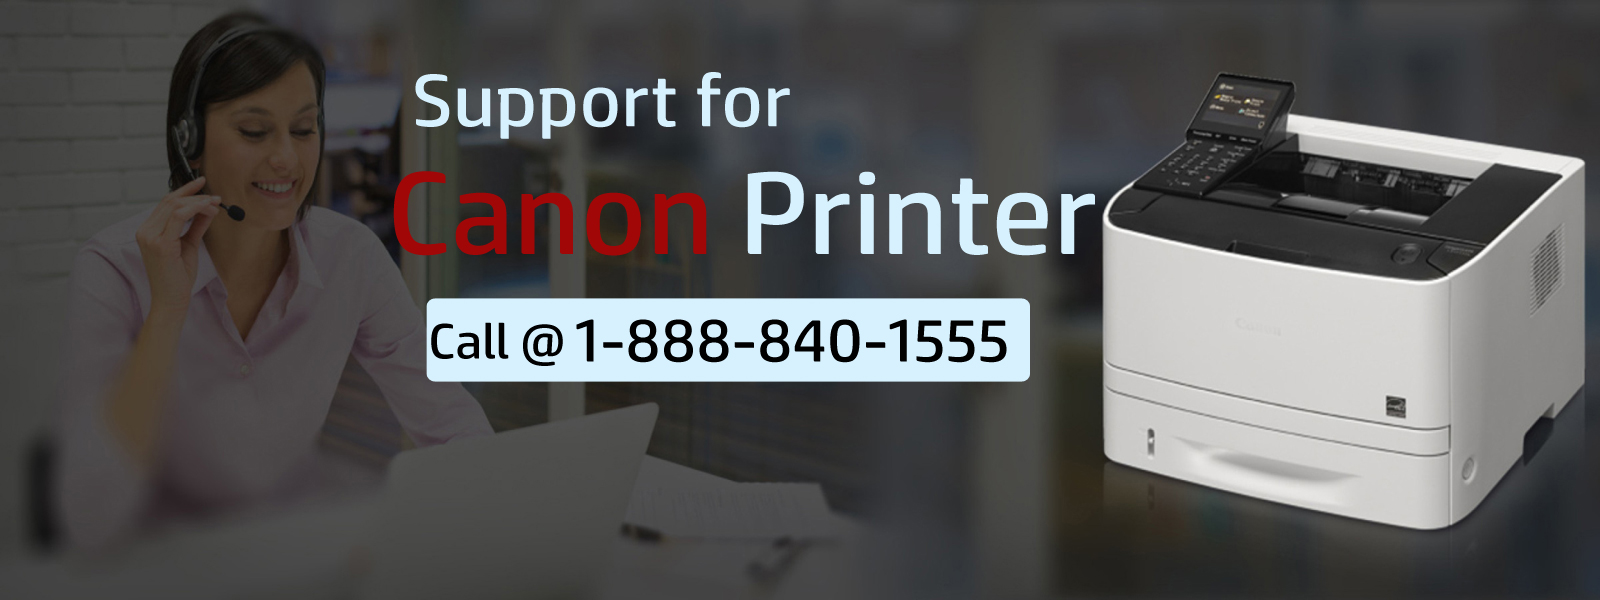 Printer Customer Care Phone Number 1-888-840-1555 for Canon Printer